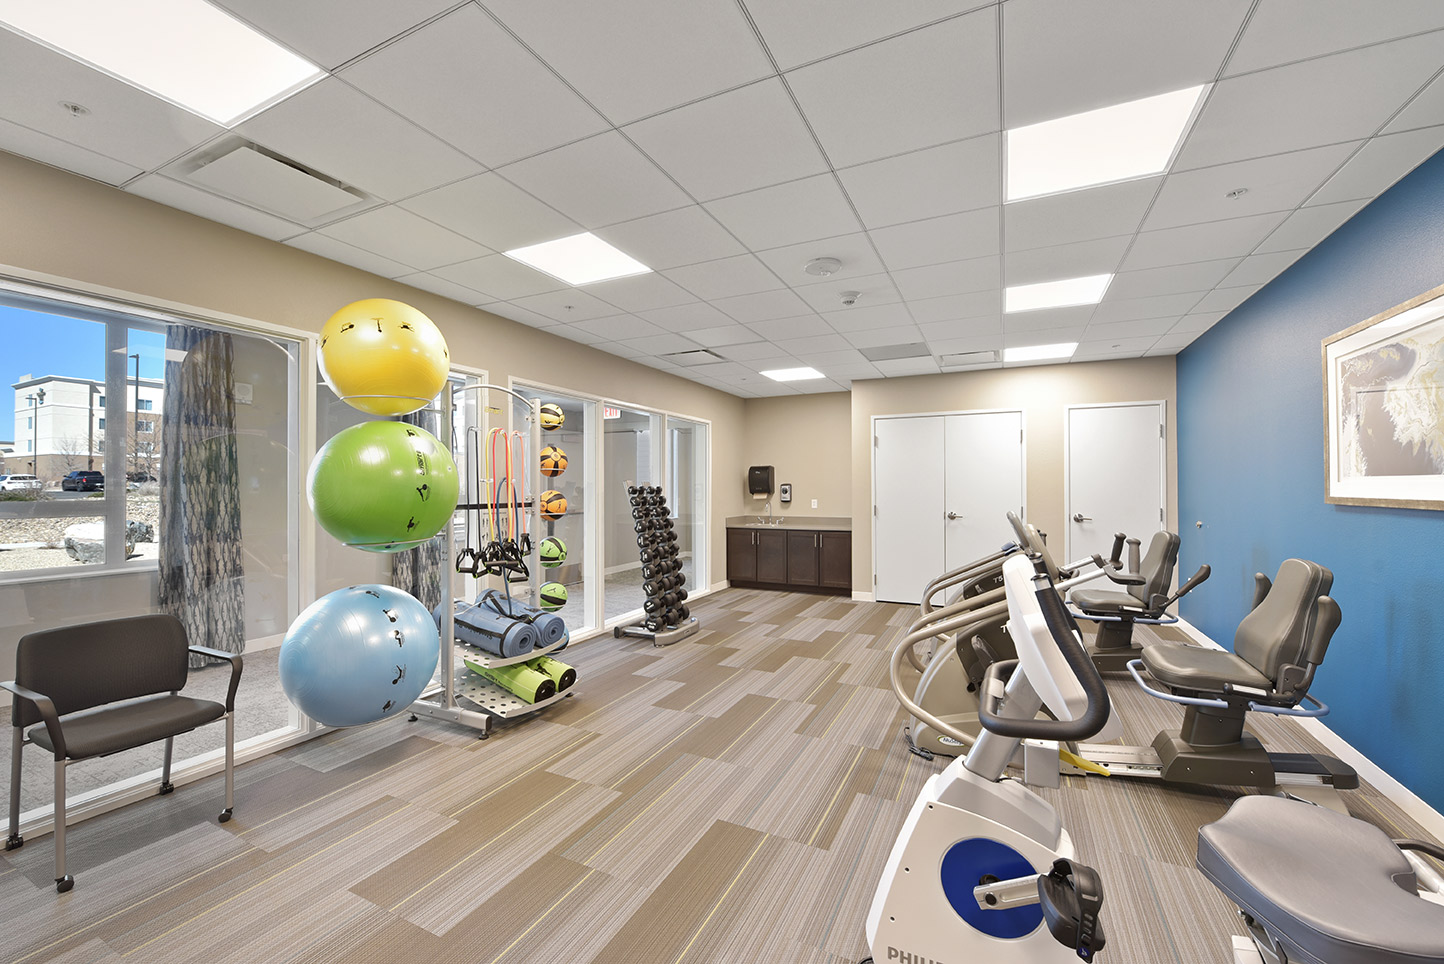 The Lodge at Greeley fitness center